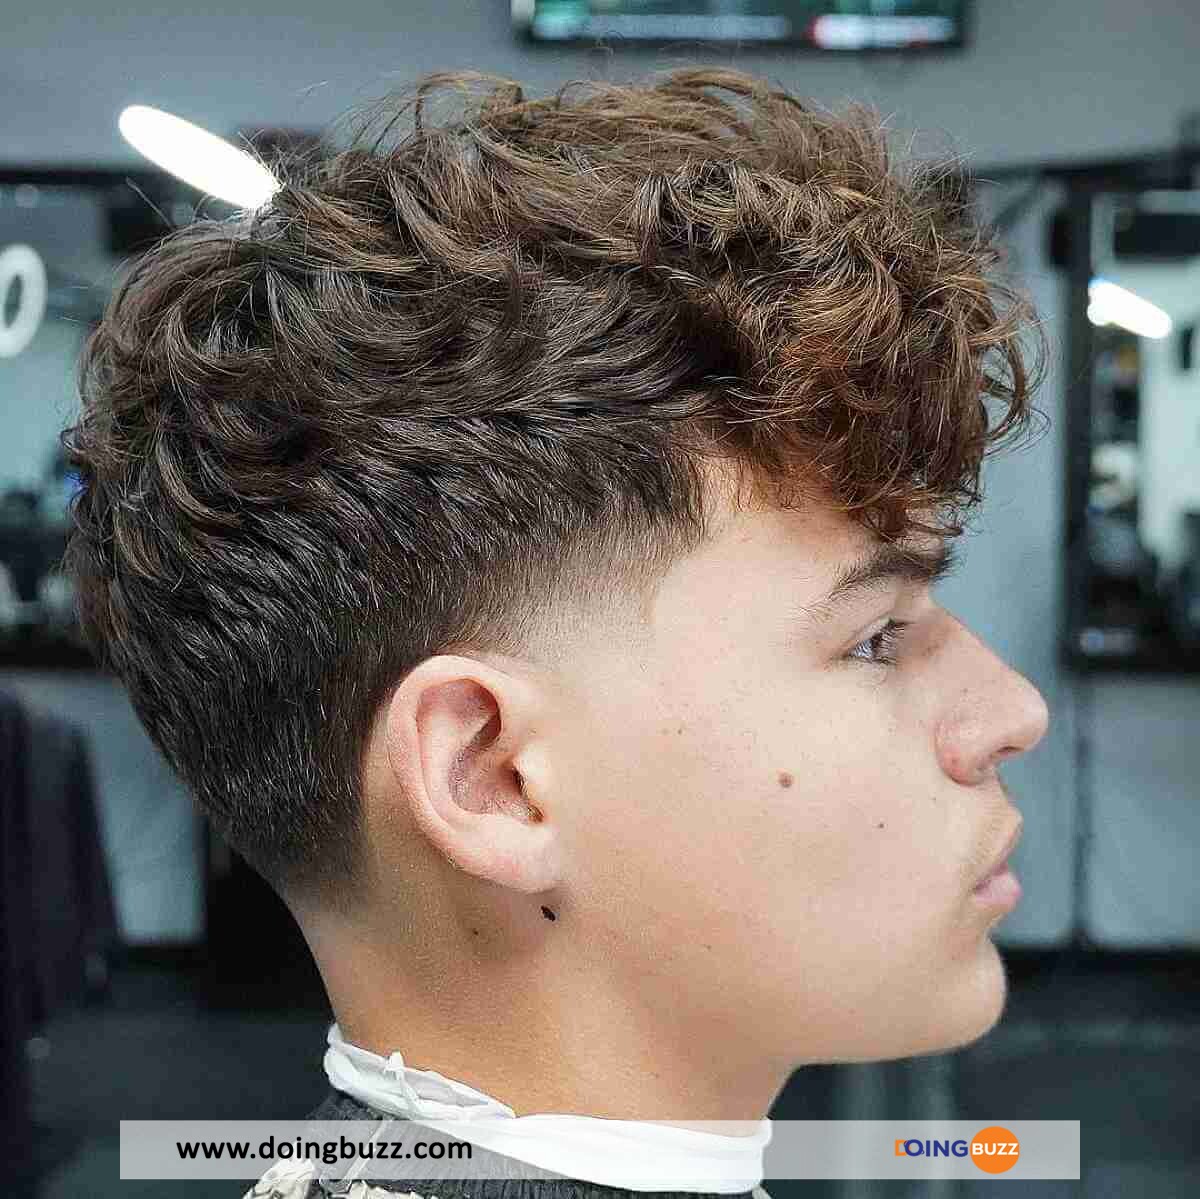 Taper Fade Haircut With Tousled Curls